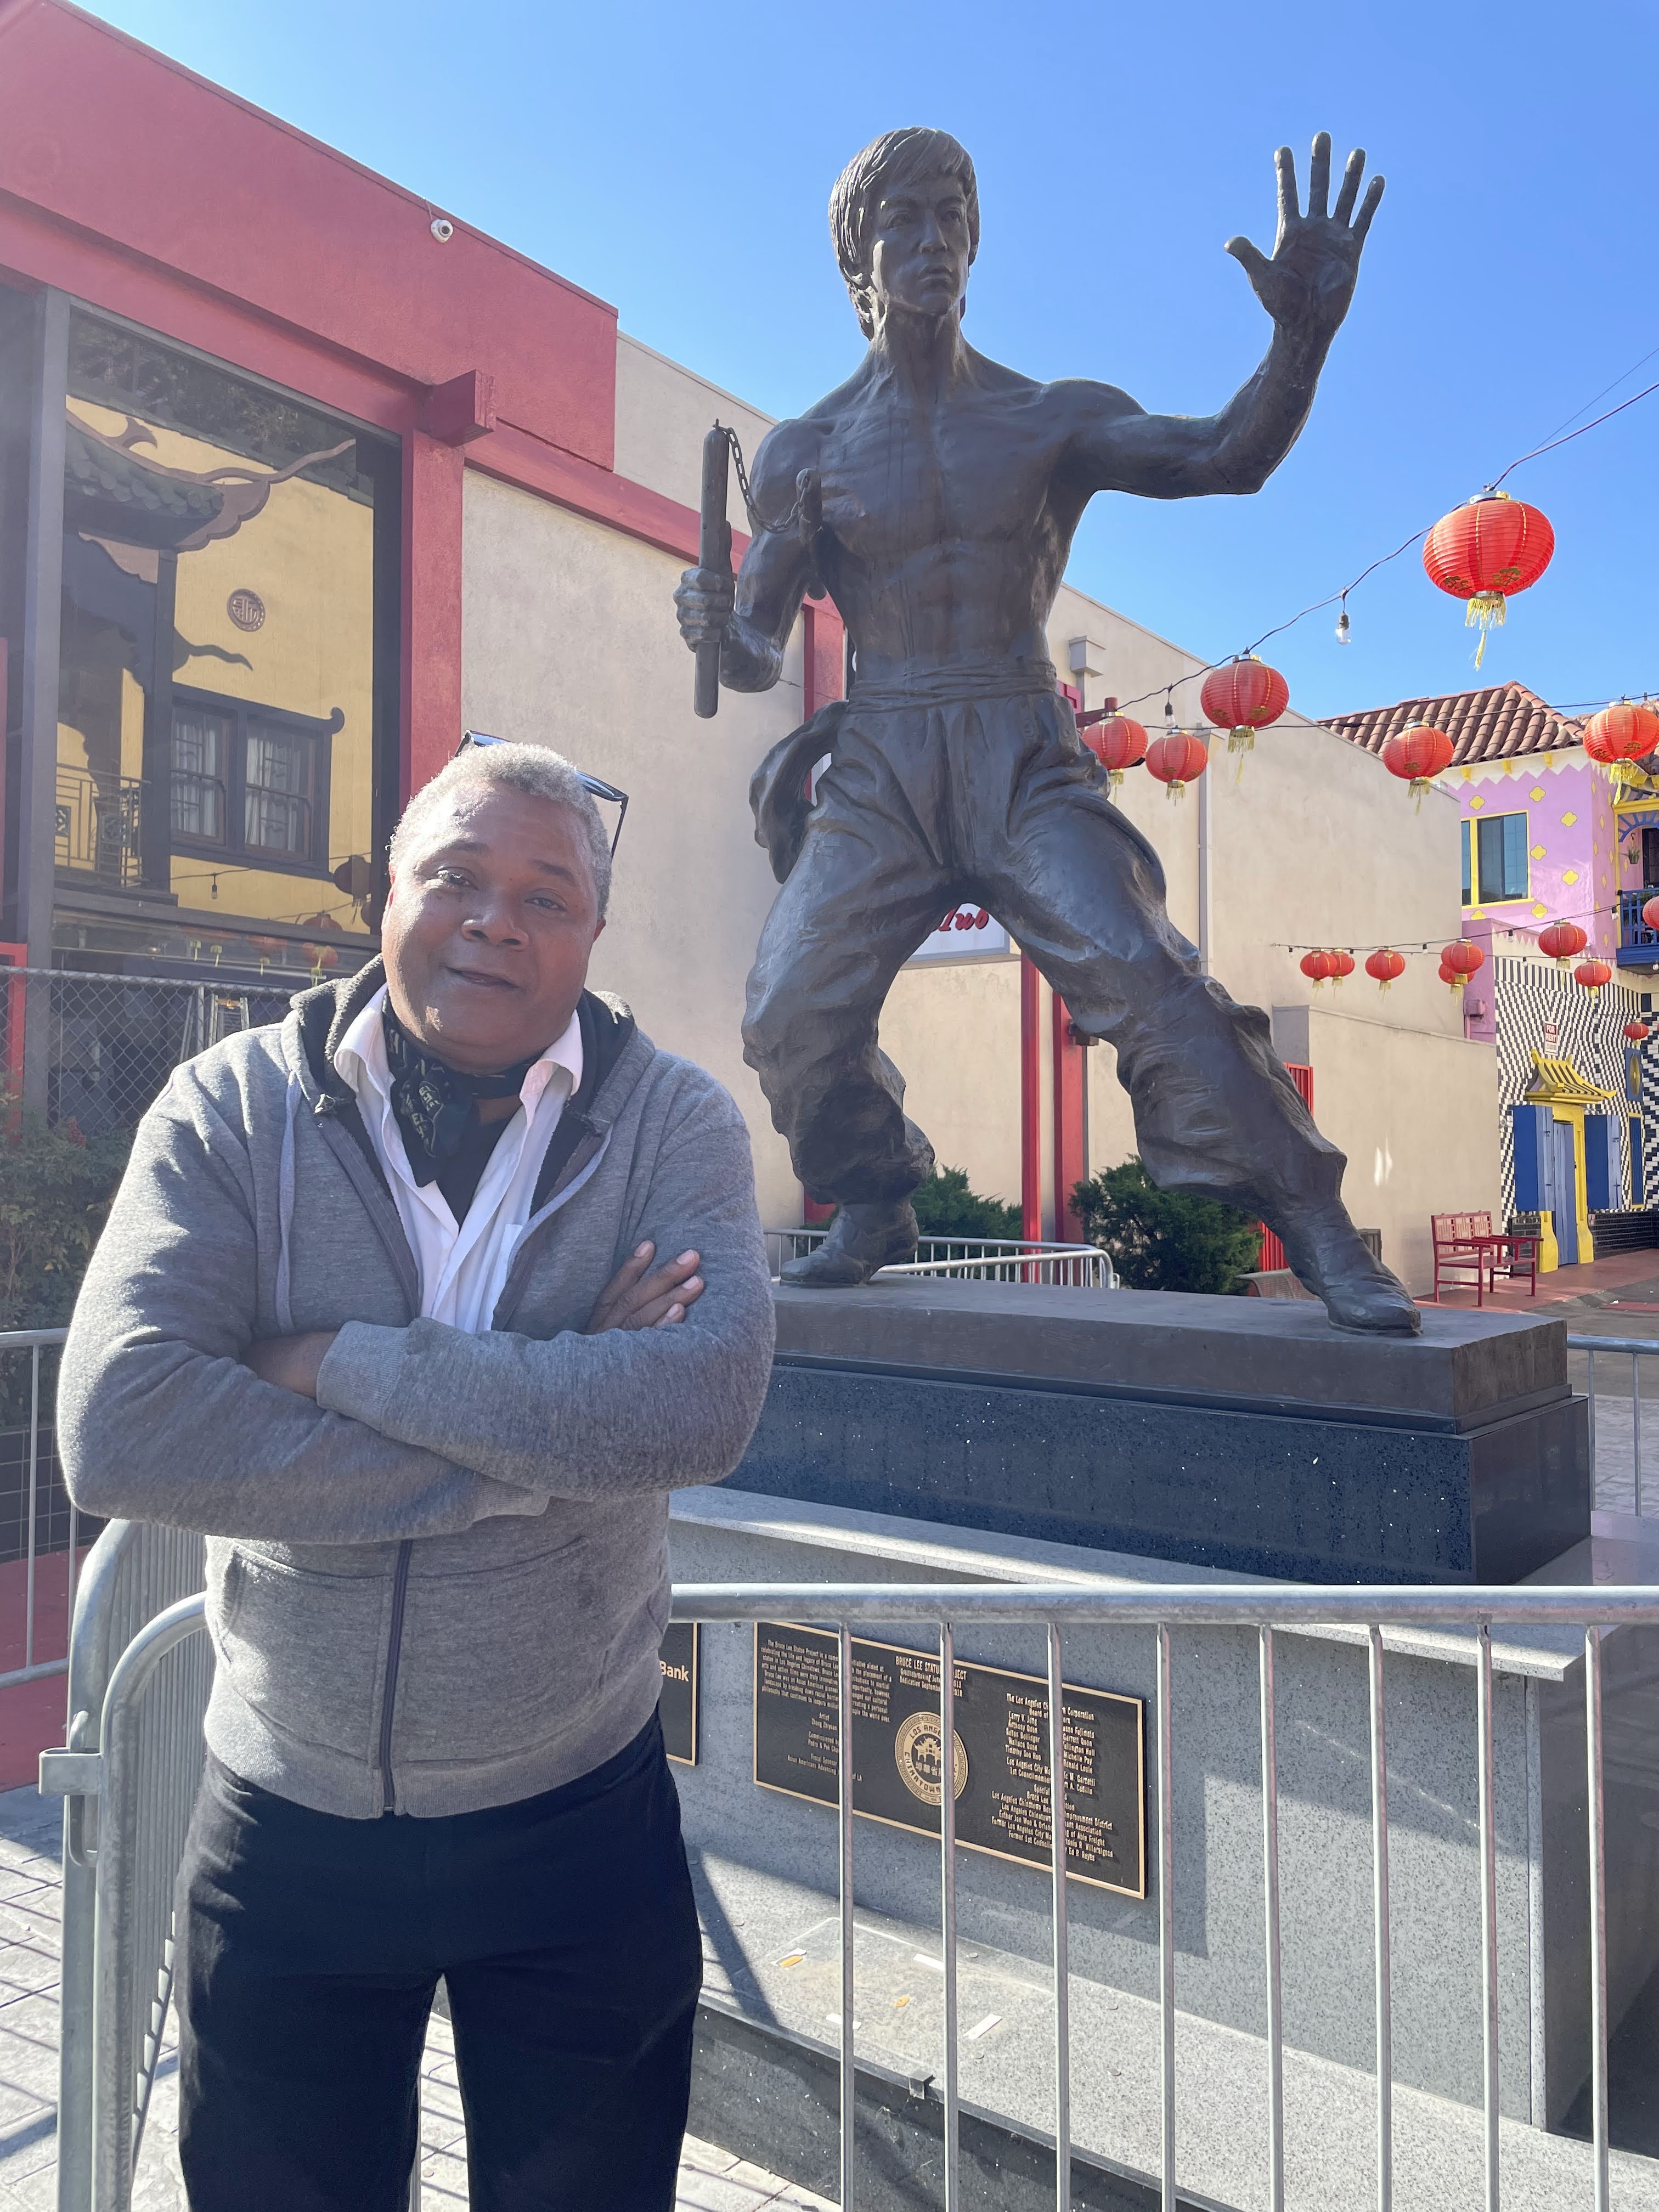 Poe Meets Lee: Viewable at his YouTube channel, in November of 2021, Darryl Maximilian Robinson released two takes of El Dorado by Edgar Allan Poe recorded before the popular Bruce Lee Statue in DTLA.